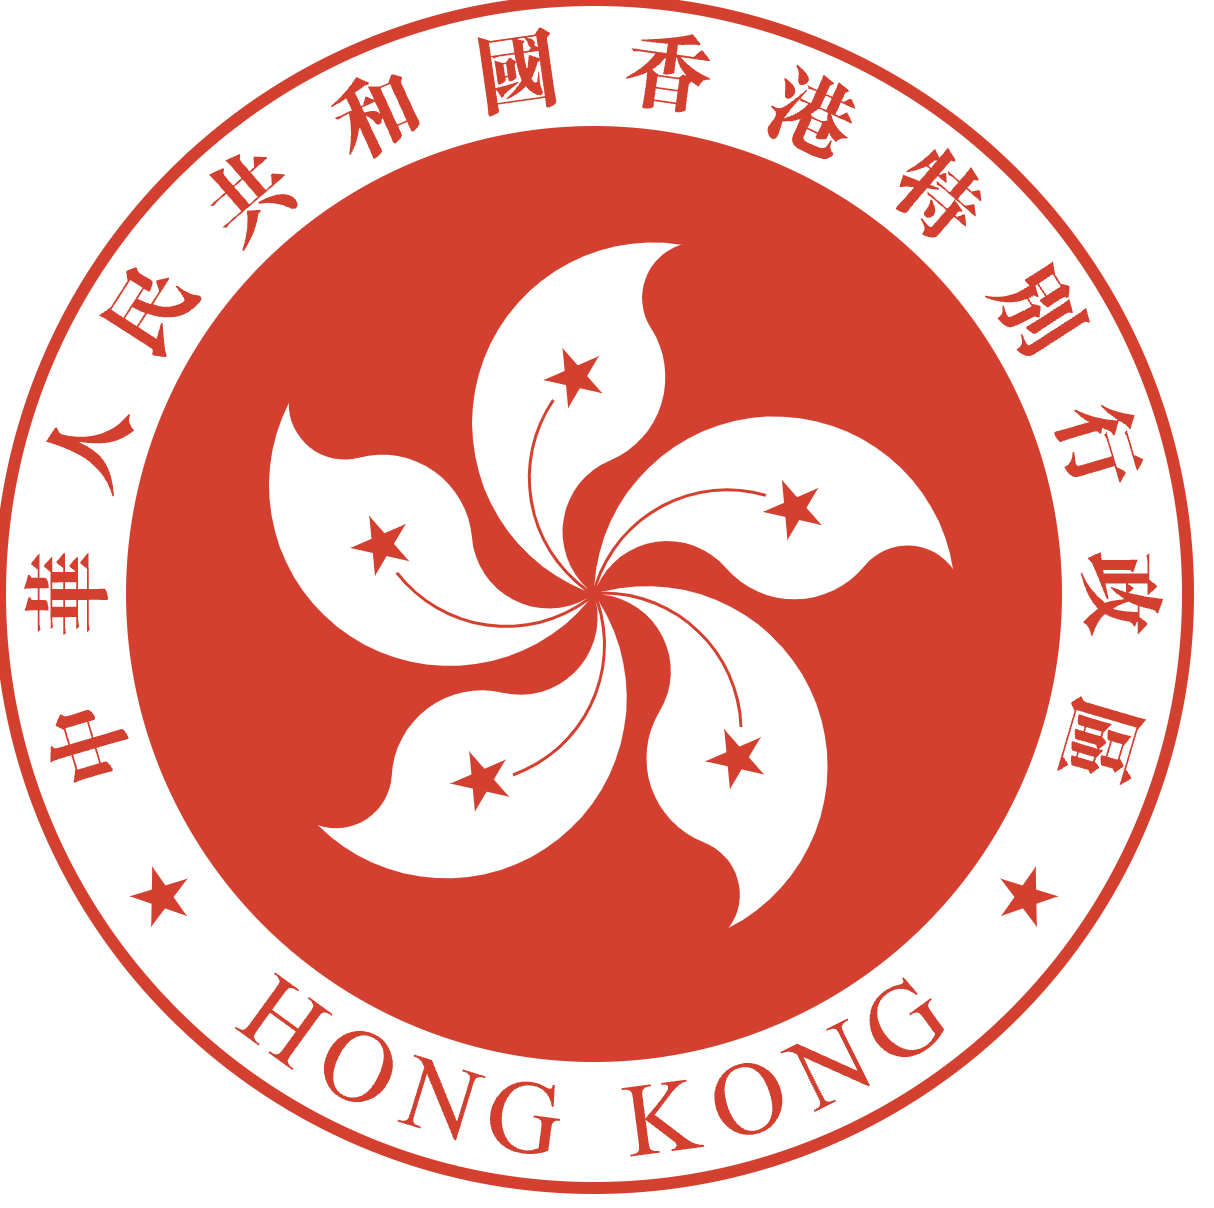 The New Foreign-sourced Income Regime In Hong Kong From 2023 Onwards